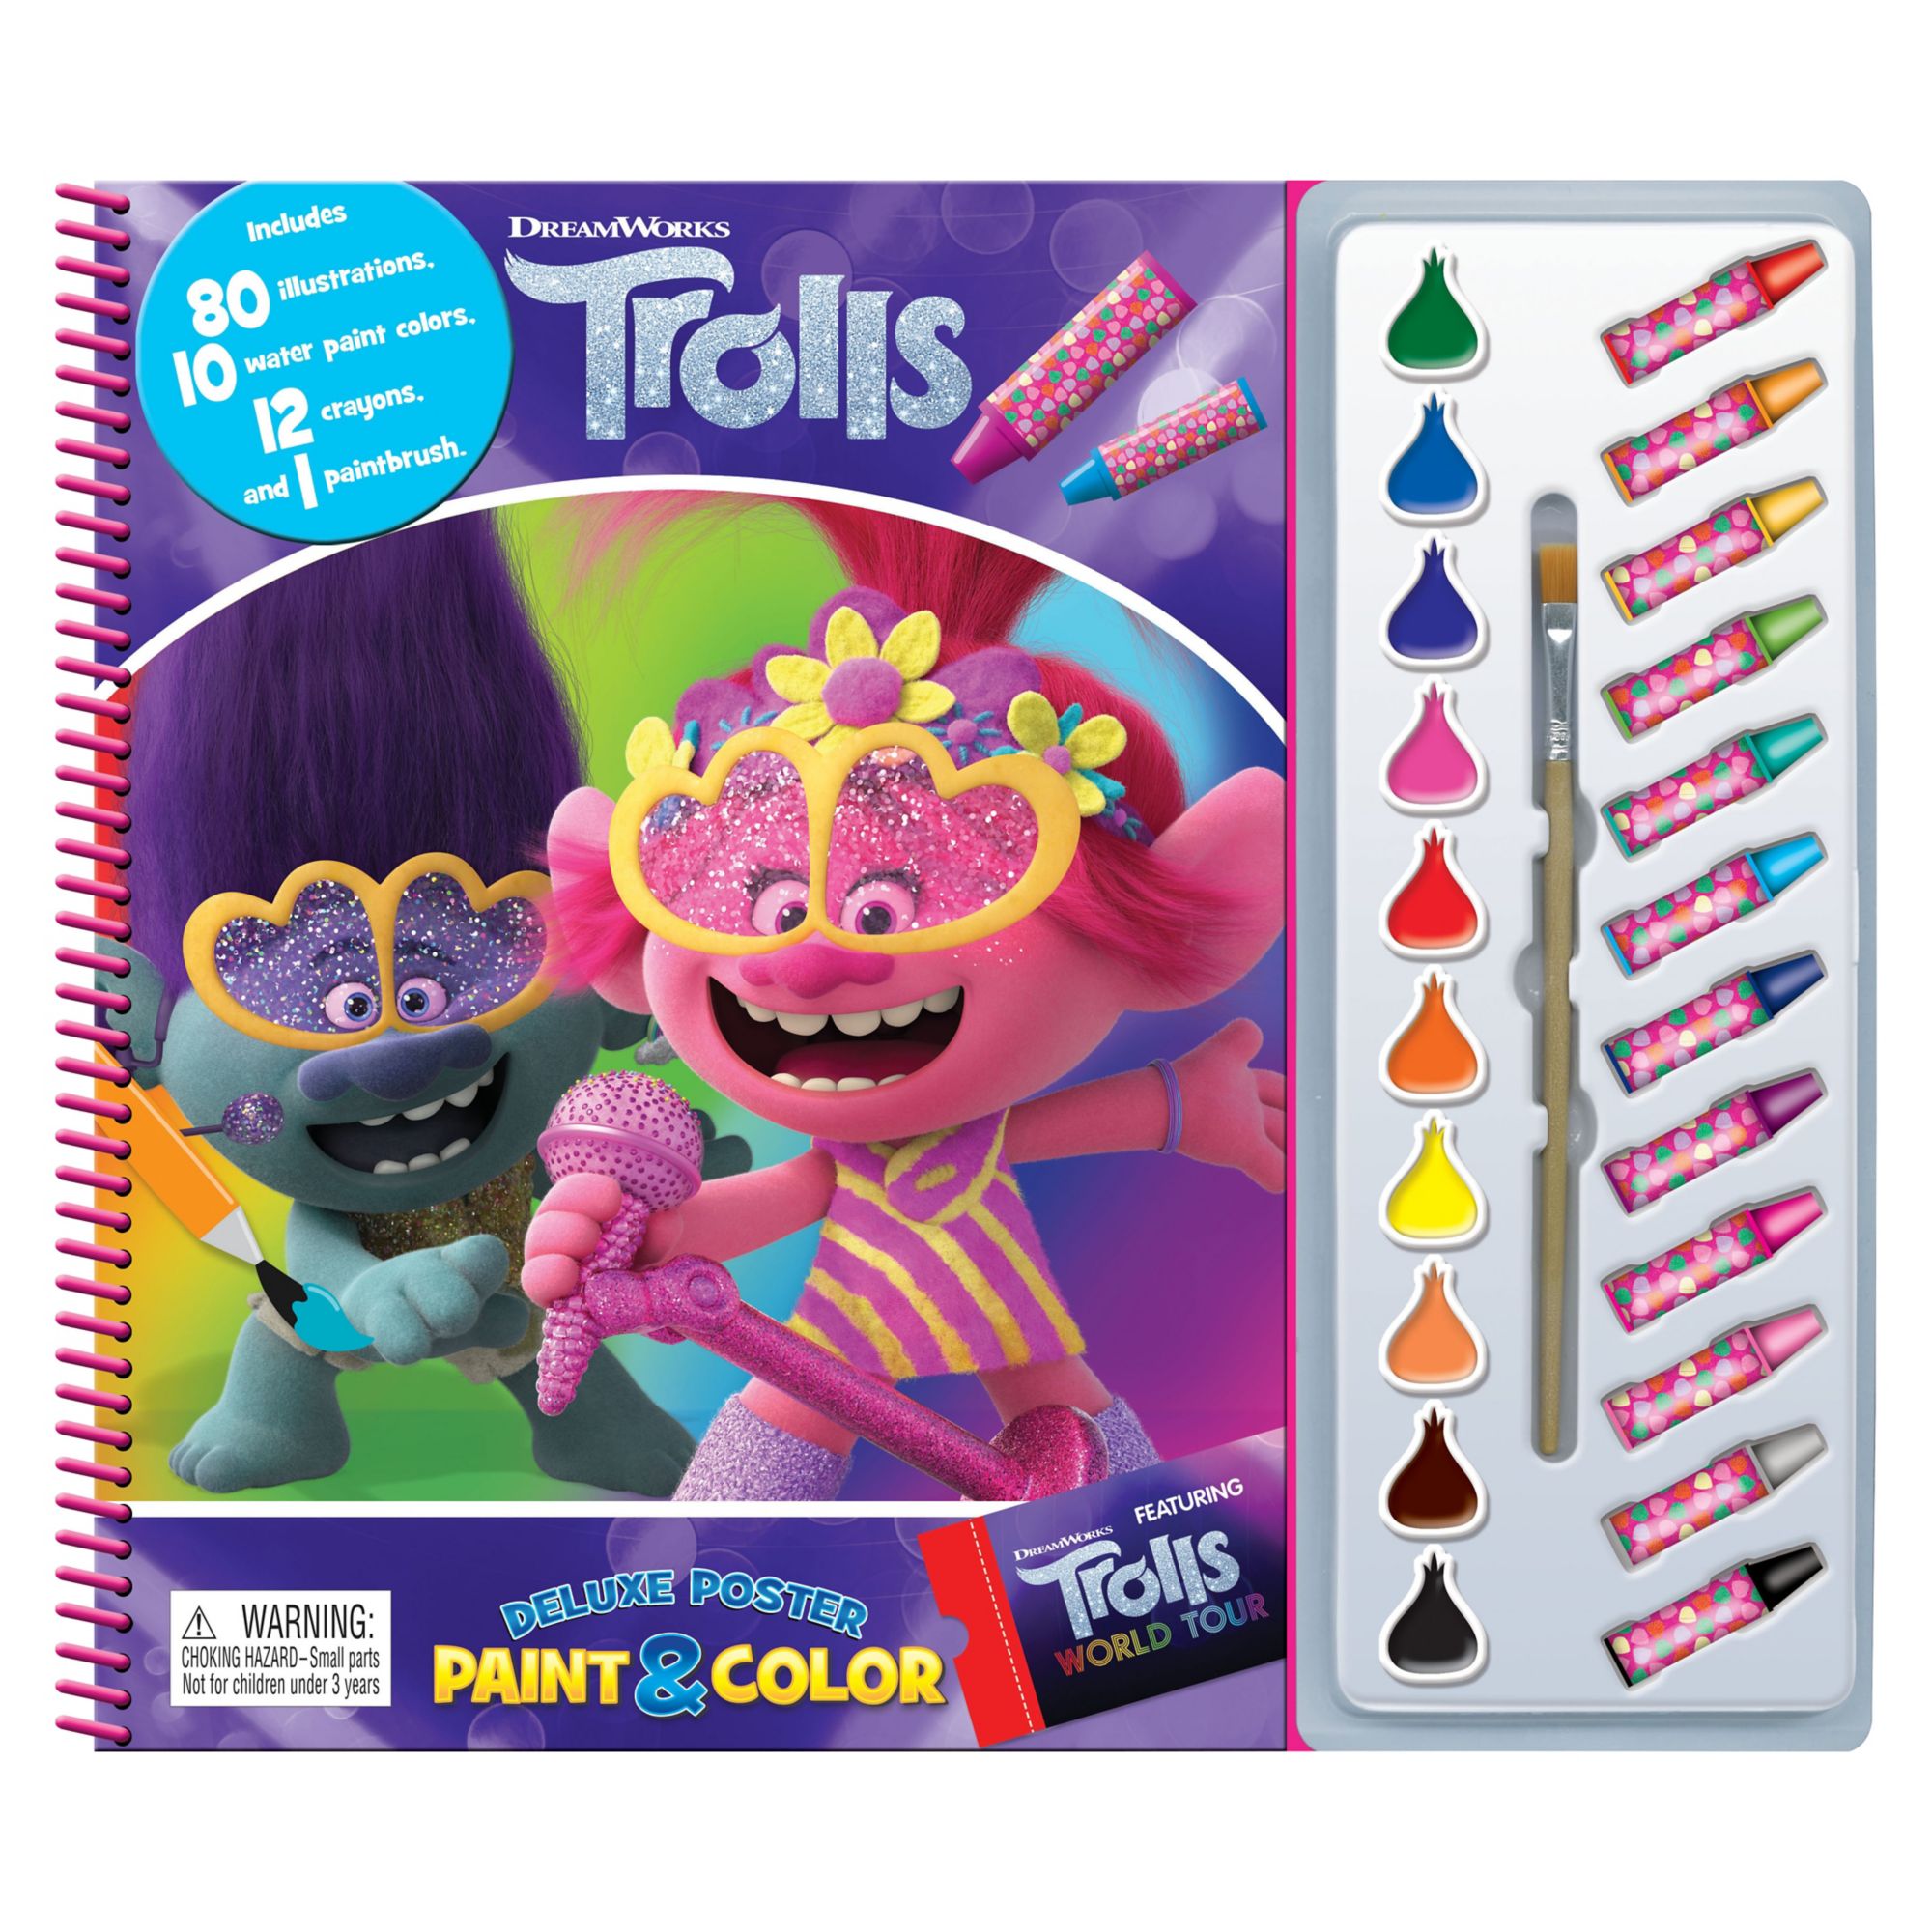 Trolls 2 Deluxe Poster Paint & Color